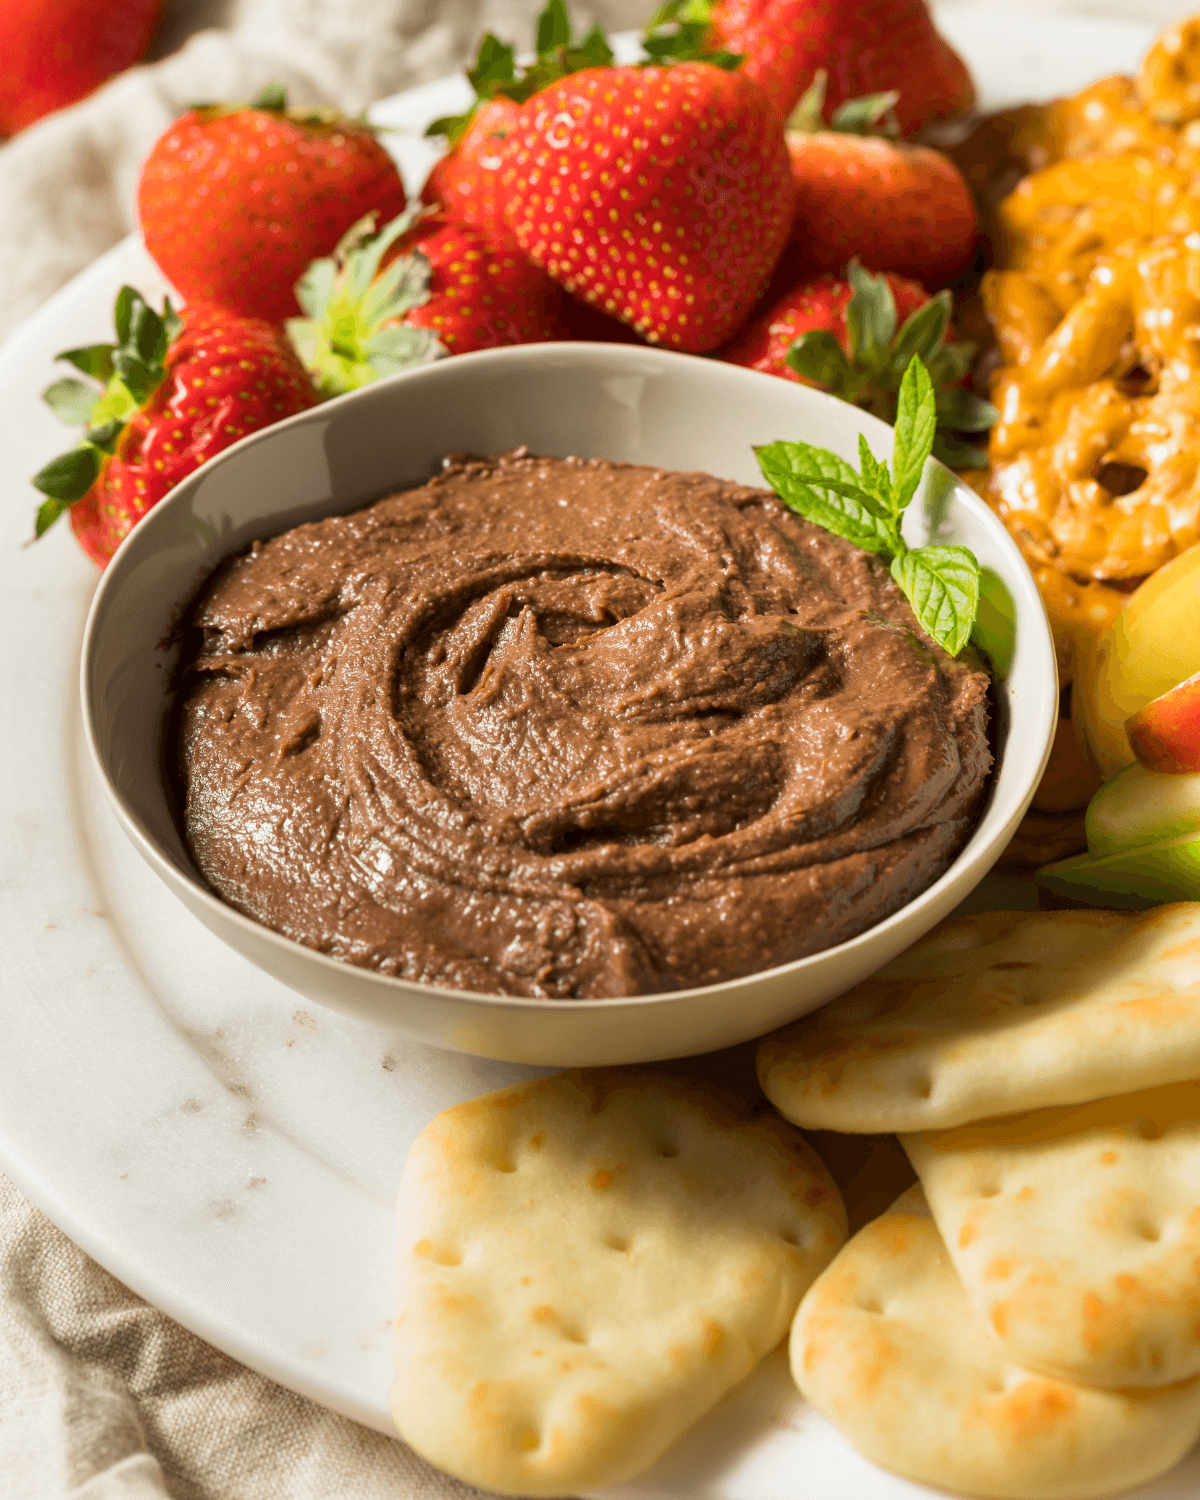 A platter of fruit and crackers with the chocolate hummus.